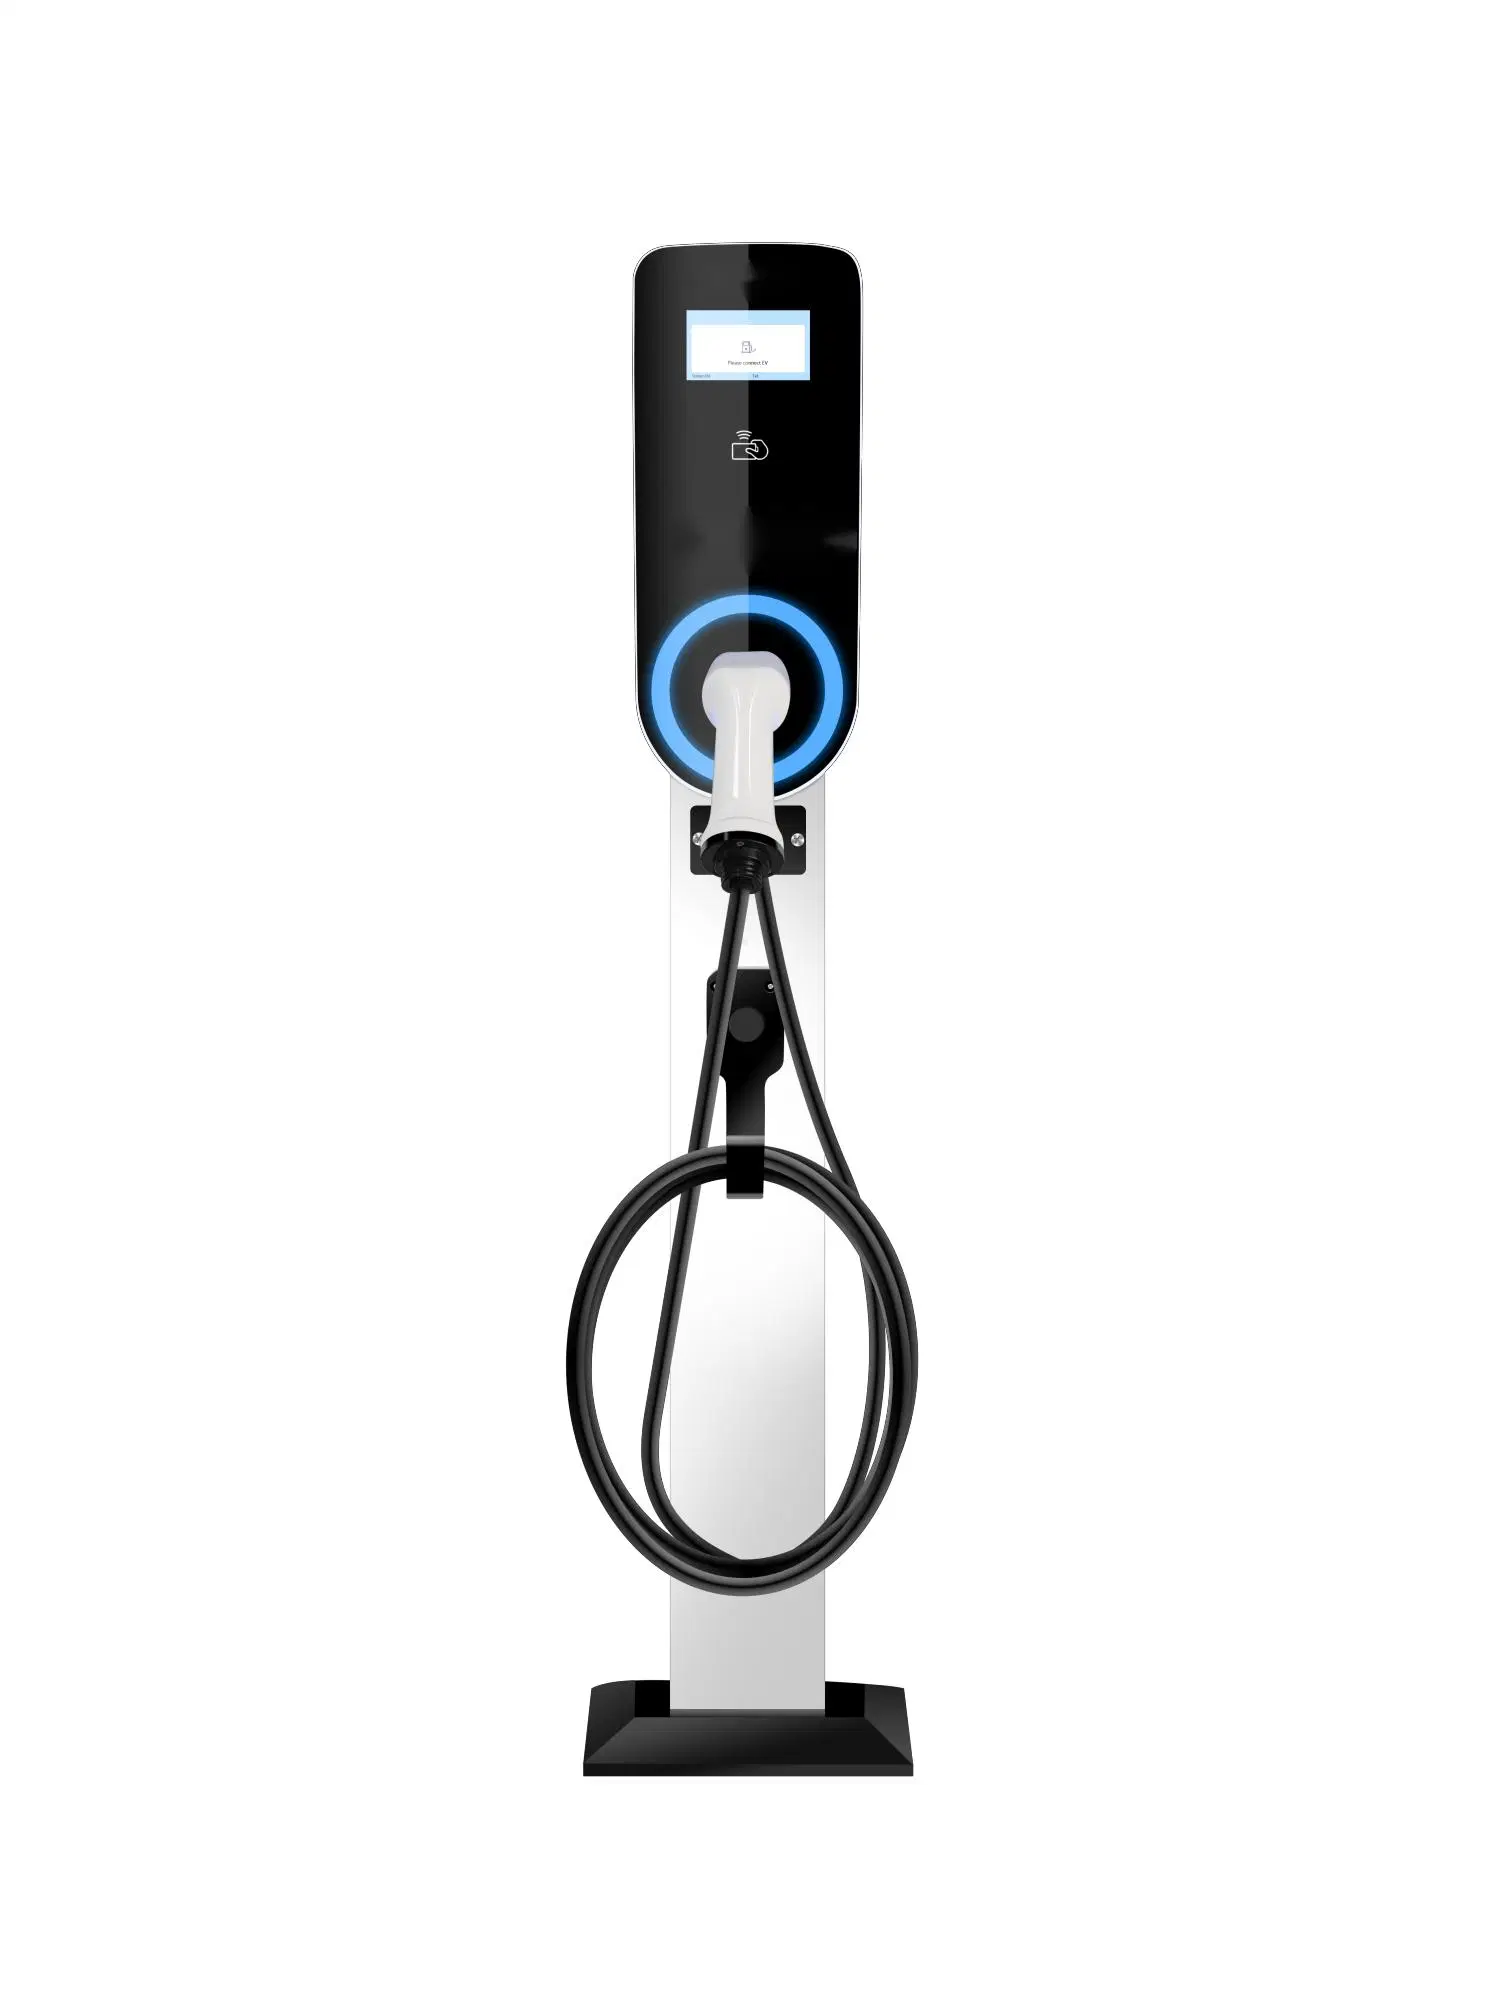 Waterproof Flooring Mounted Smart EV Charger AC for Home or Residential Use